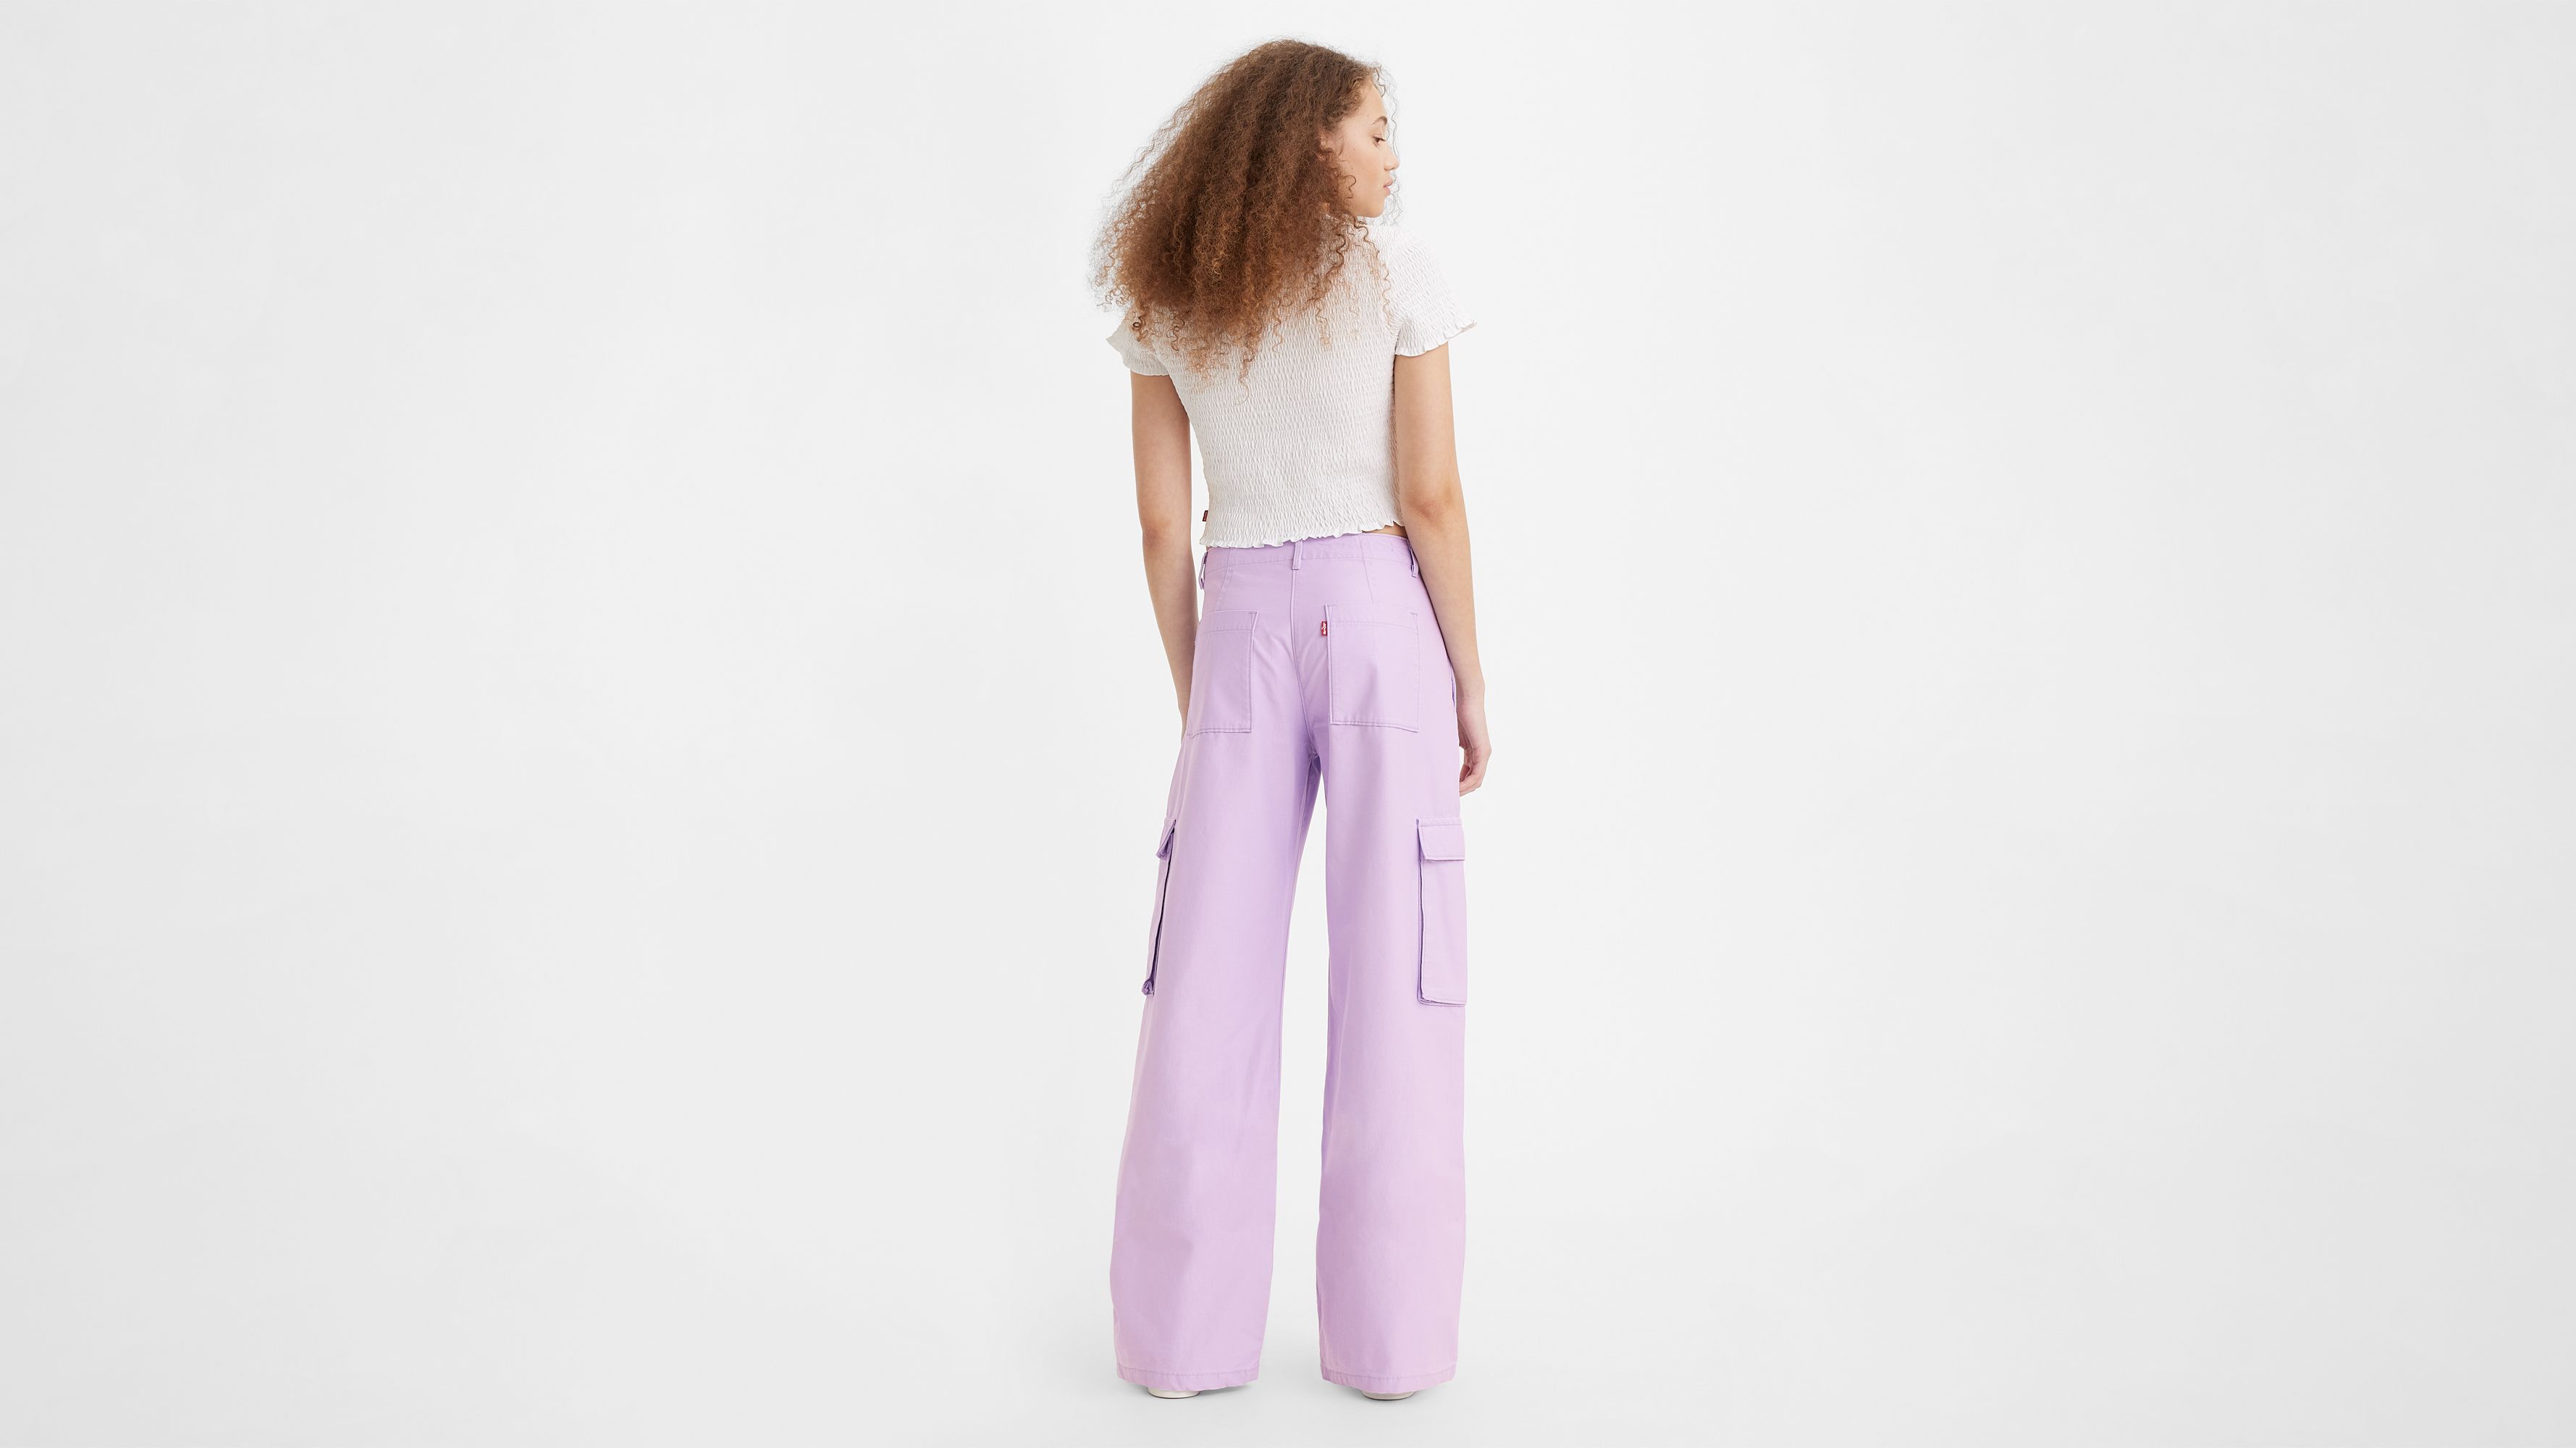 High Quality Purple Cargo Pants With Large Pockets For Women Loose